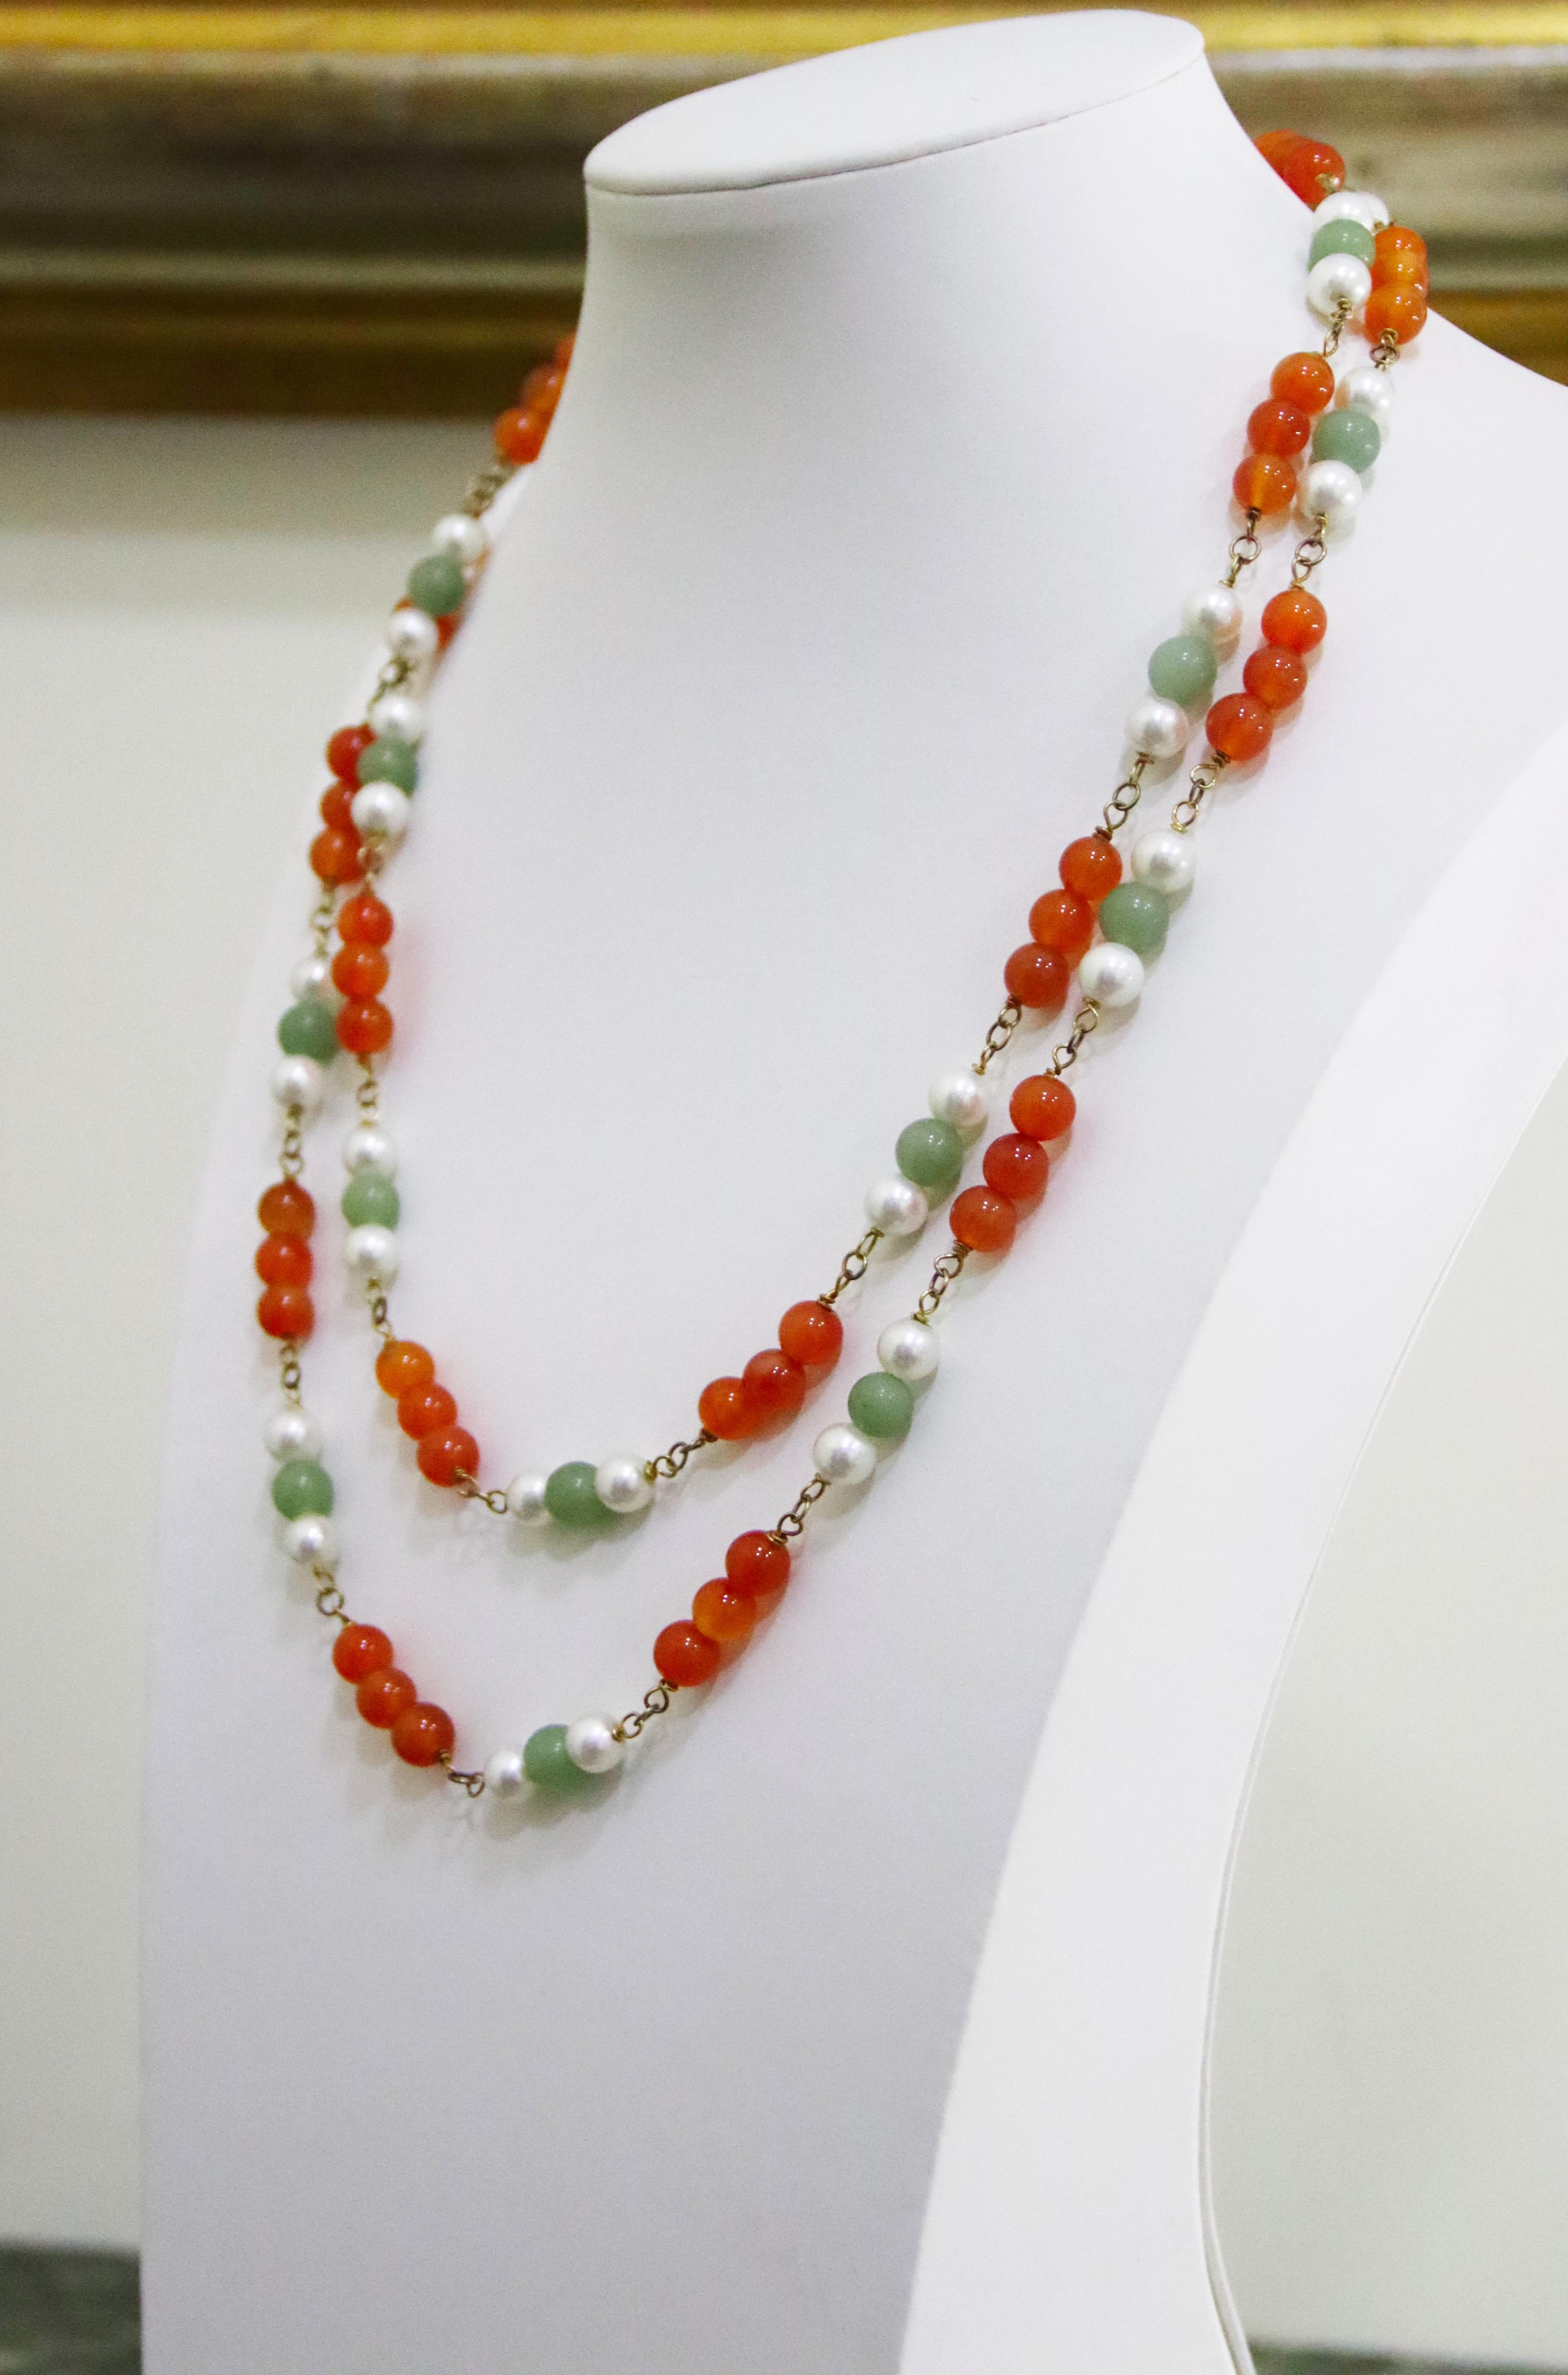 Mixed Cut Handcraft Pearls 800 Thousandths Silver Carnelian Agate Beaded Necklace For Sale